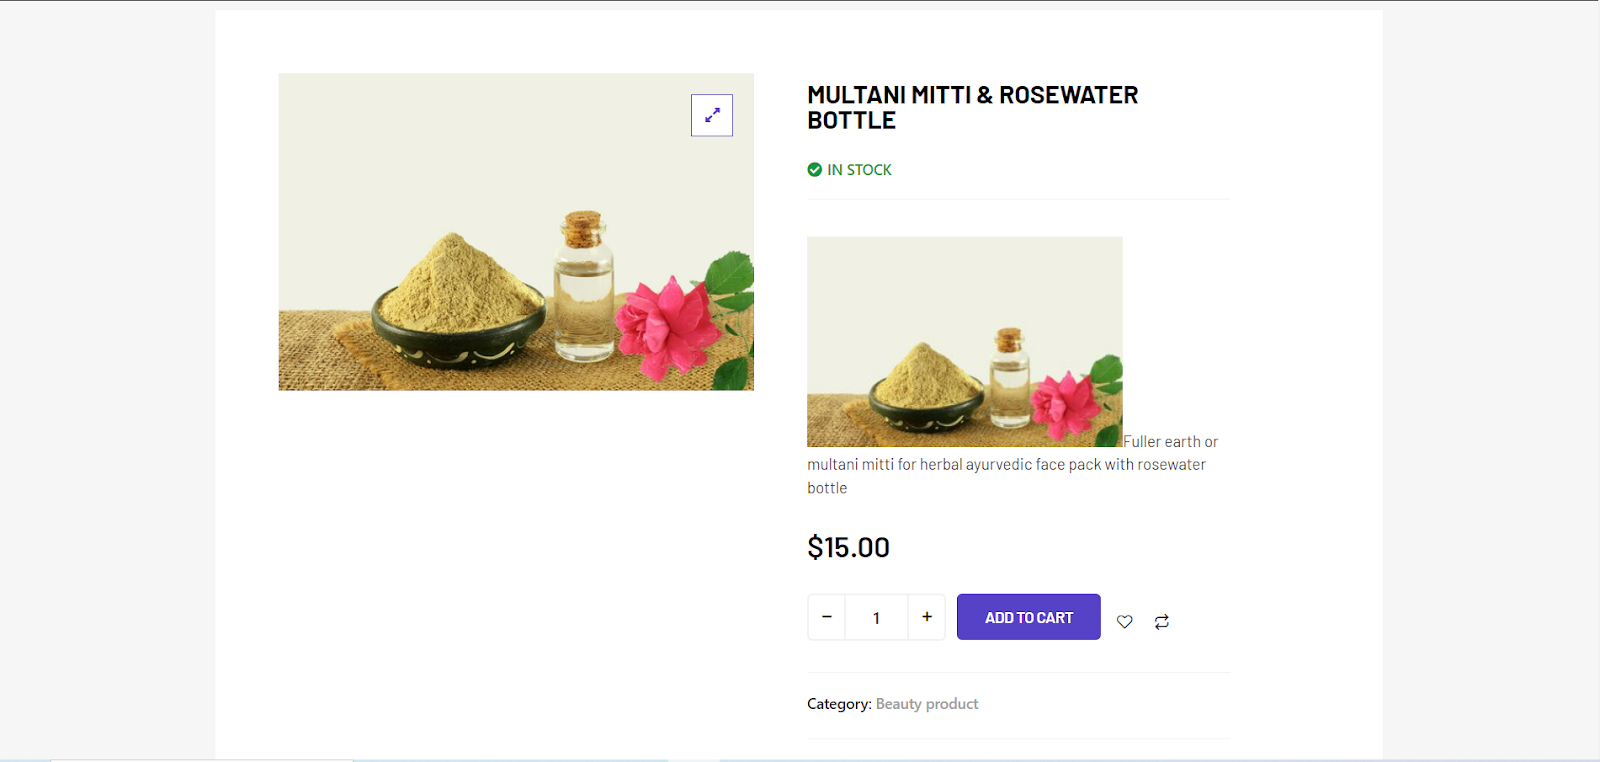 ShopEngine is the best tool to design a beauty supply website